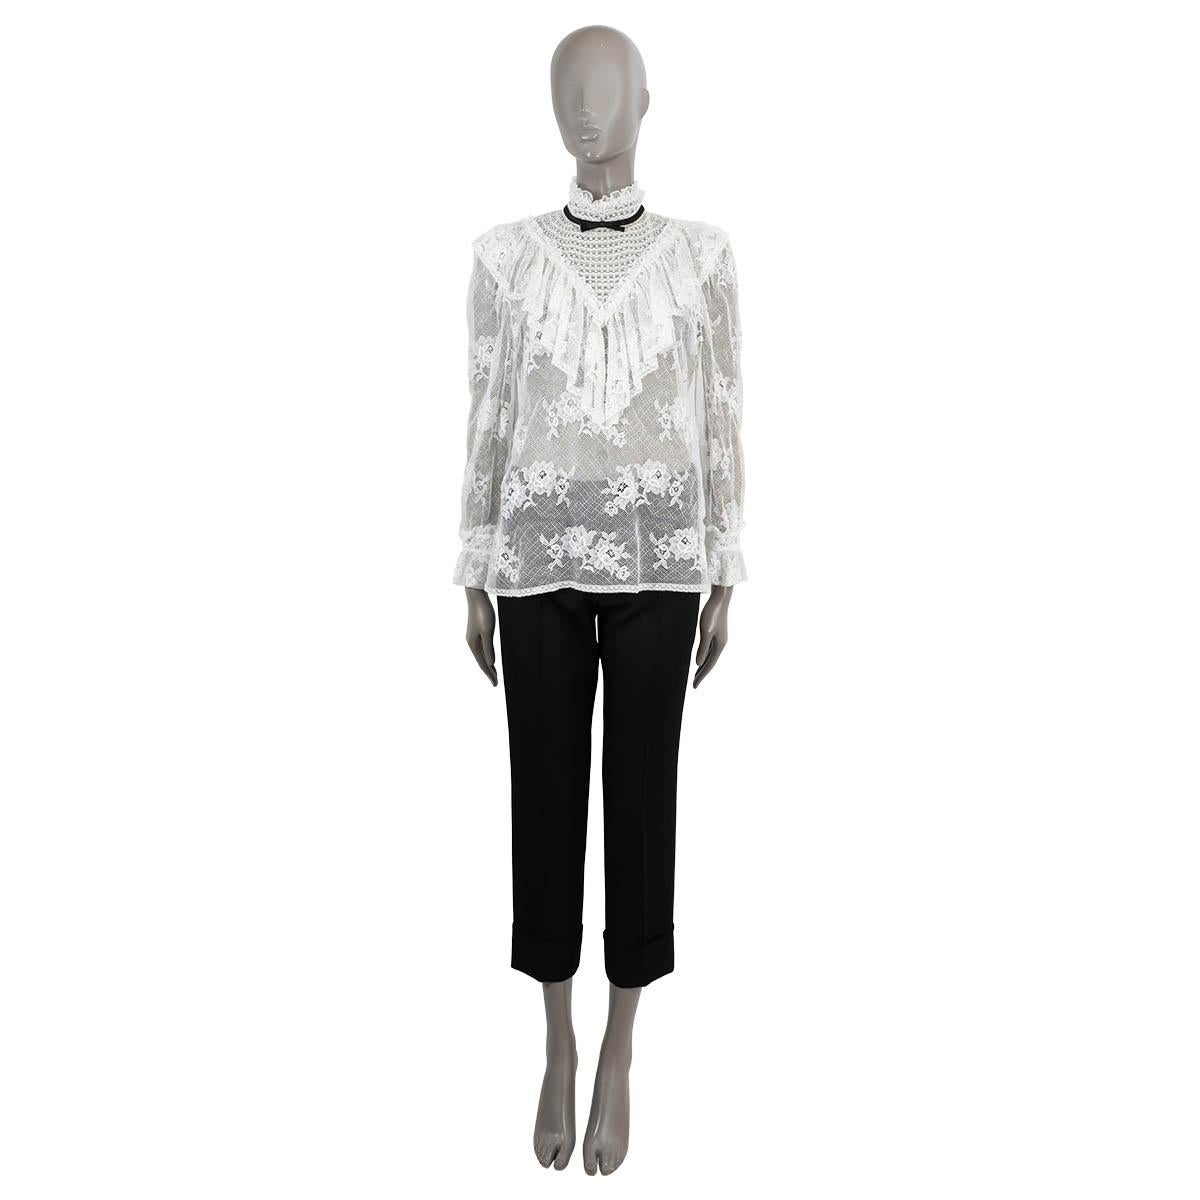 100% authentic Miu Miu semi sheer blouse in white floral lace cotton (assumingly - content tag is missing). Features a mock neck with black mini bow tie, ruffles and bell sleeves. Closes with buttons on the neck. Has been worn and is in excellent